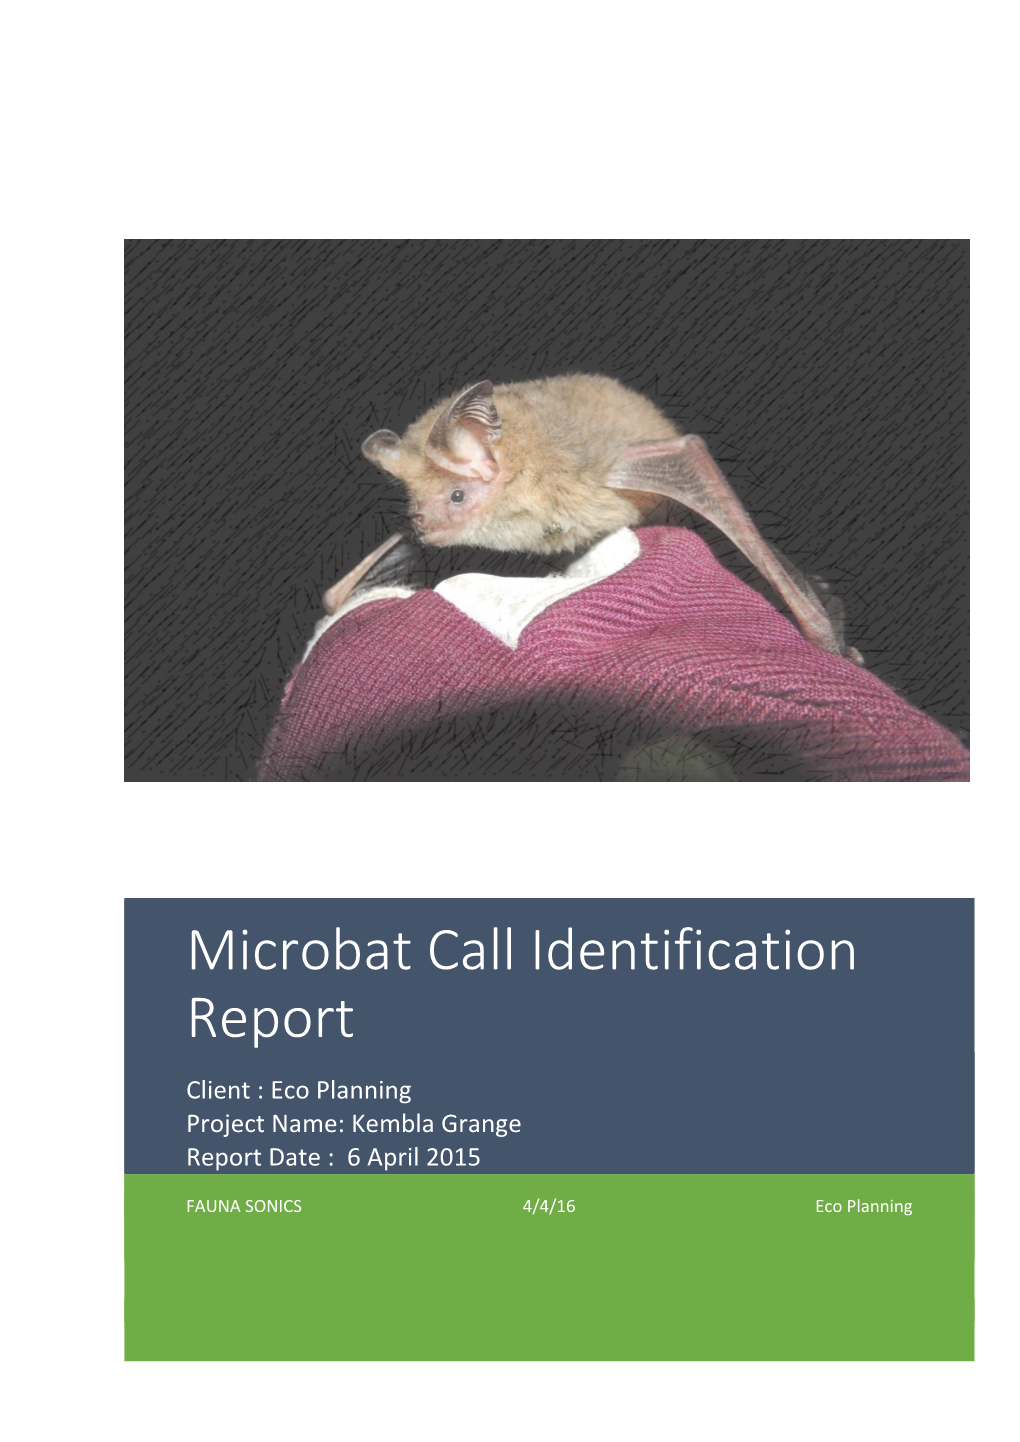 Microbat Call Identification Report Client : Eco Planning Project Name: Kembla Grange Report Date : 6 April 2015